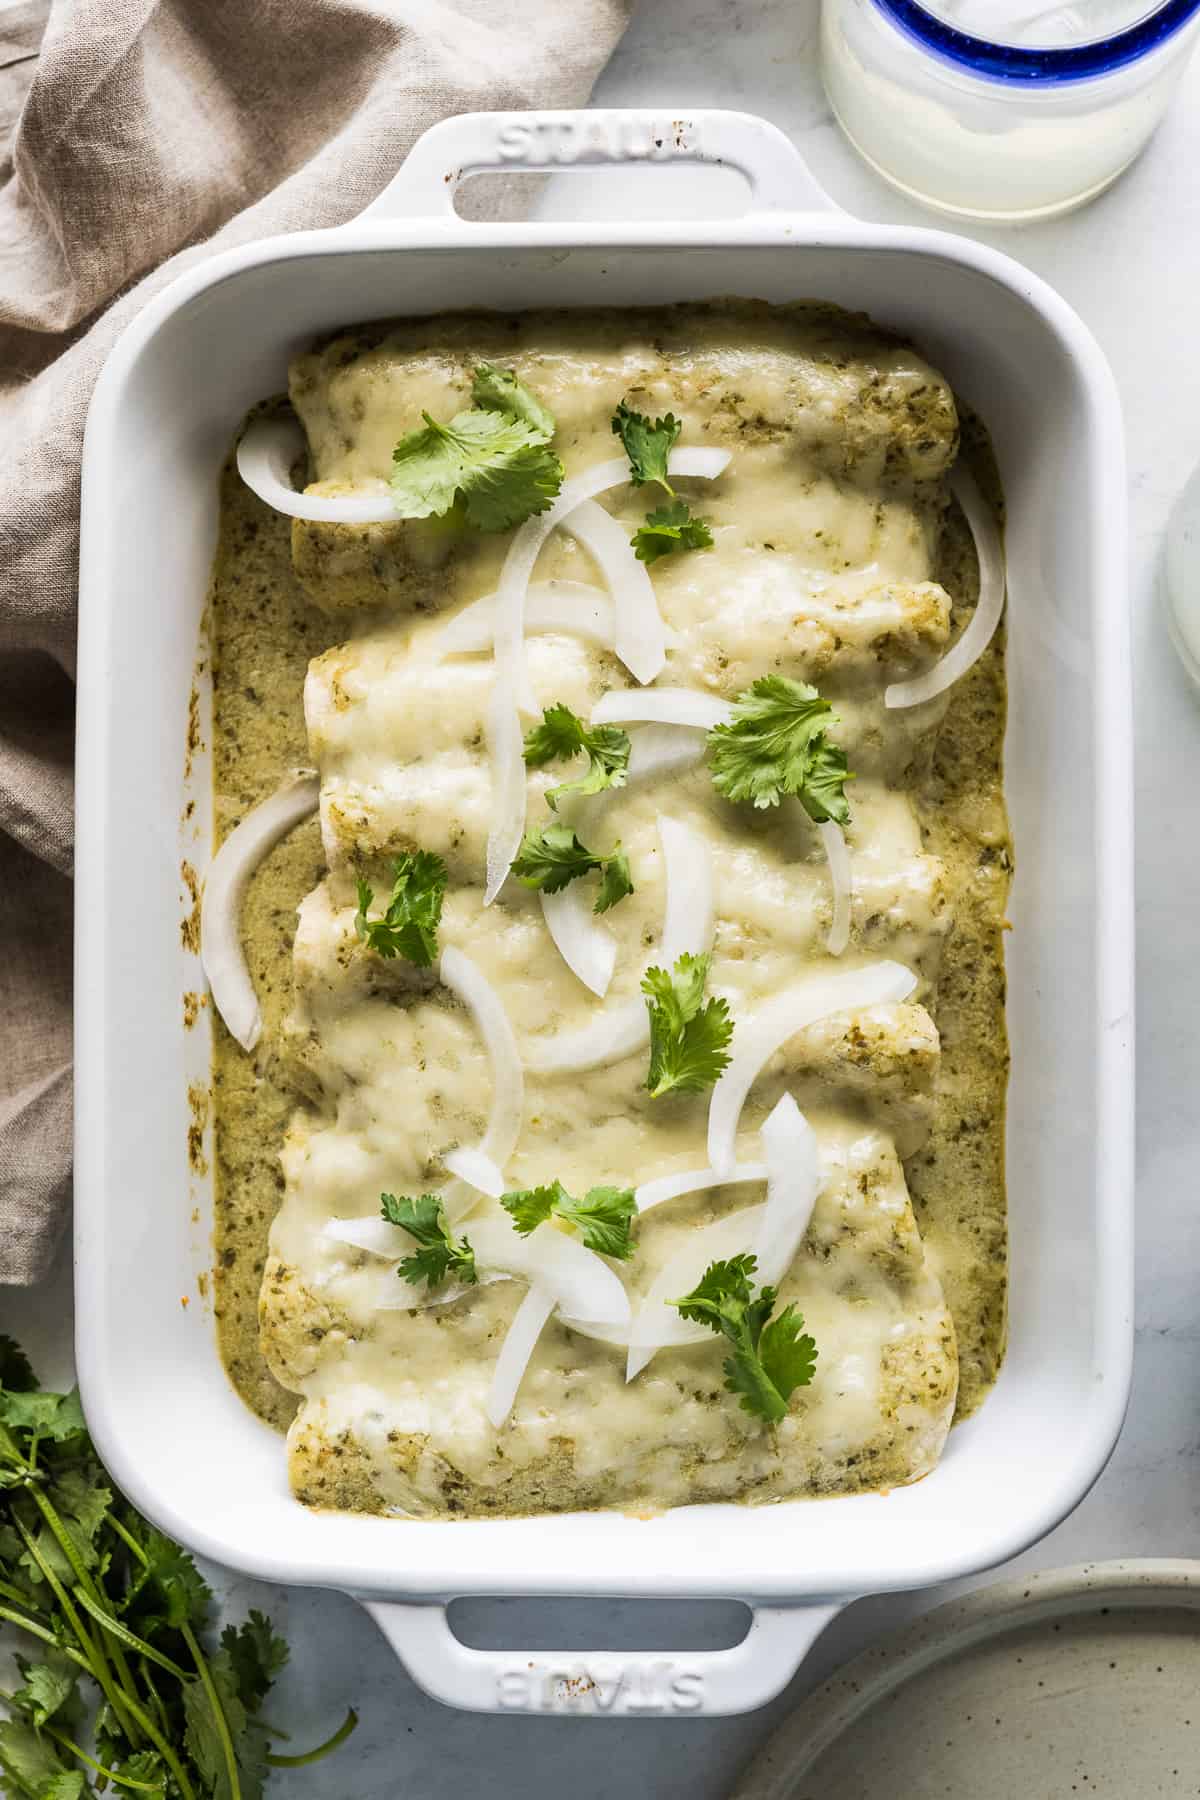 Enchiladas Suizas in a baking dish garnished with onions and cilantro.